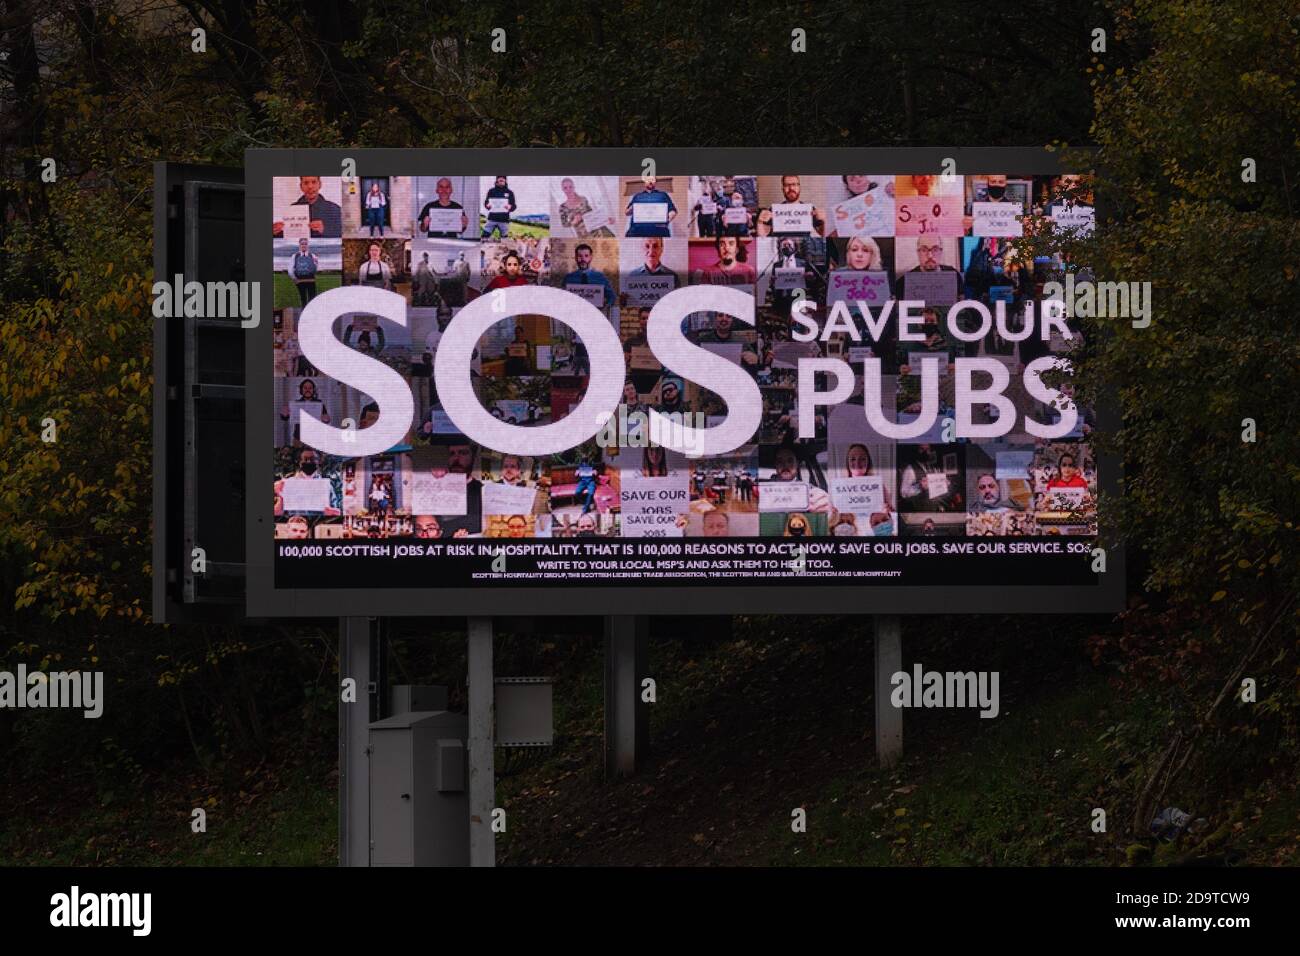 SOS Save Our Pubs digital billboard campaign to spell out the impact of restrictions on Scotland's hospitality industry, Glasgow, Scotland, UK Stock Photo